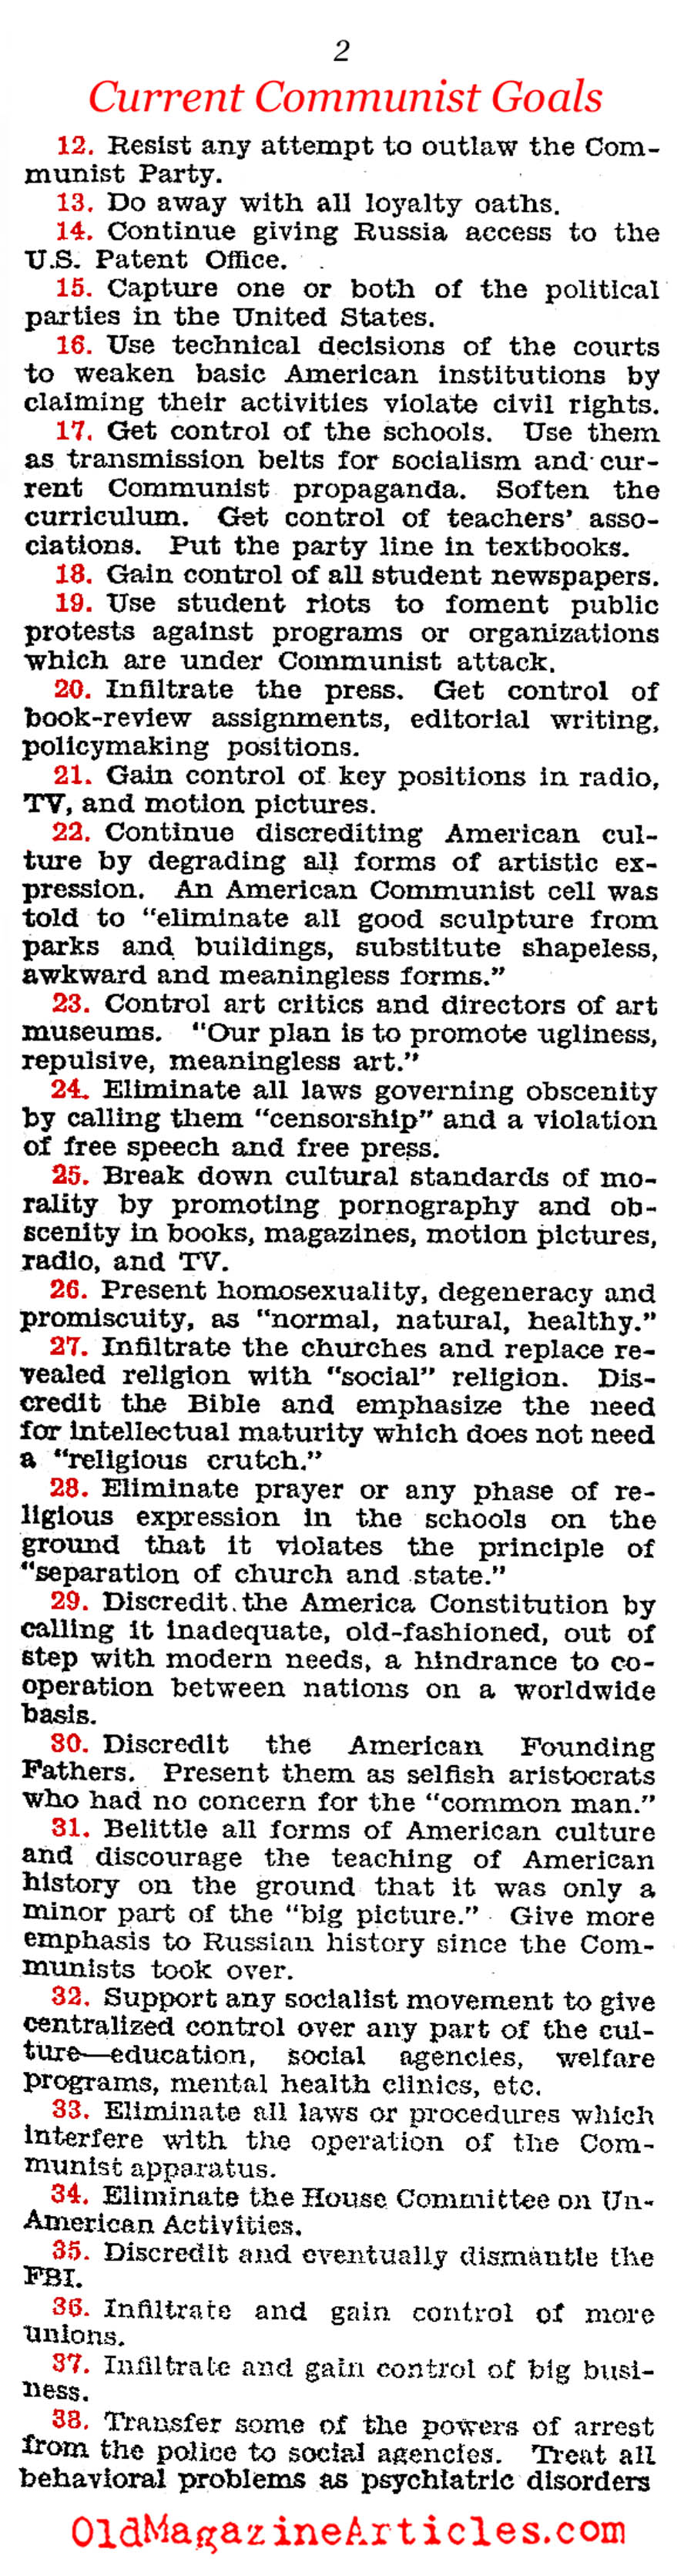 Red Goals For American Society (Congressional Record, 1963)